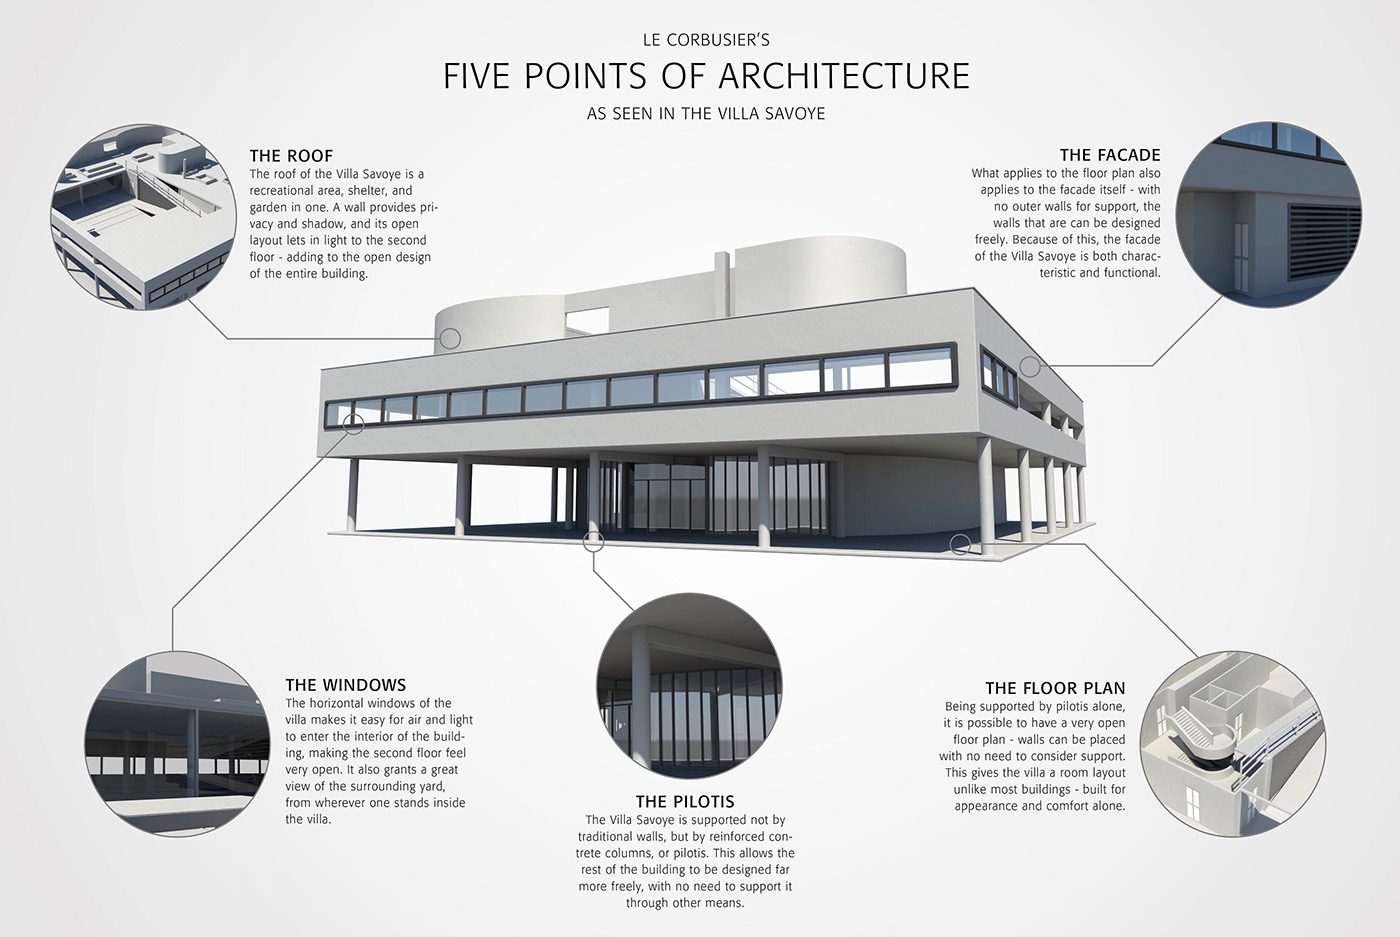 Le Corbusier 5 Points of Architecture on Behance